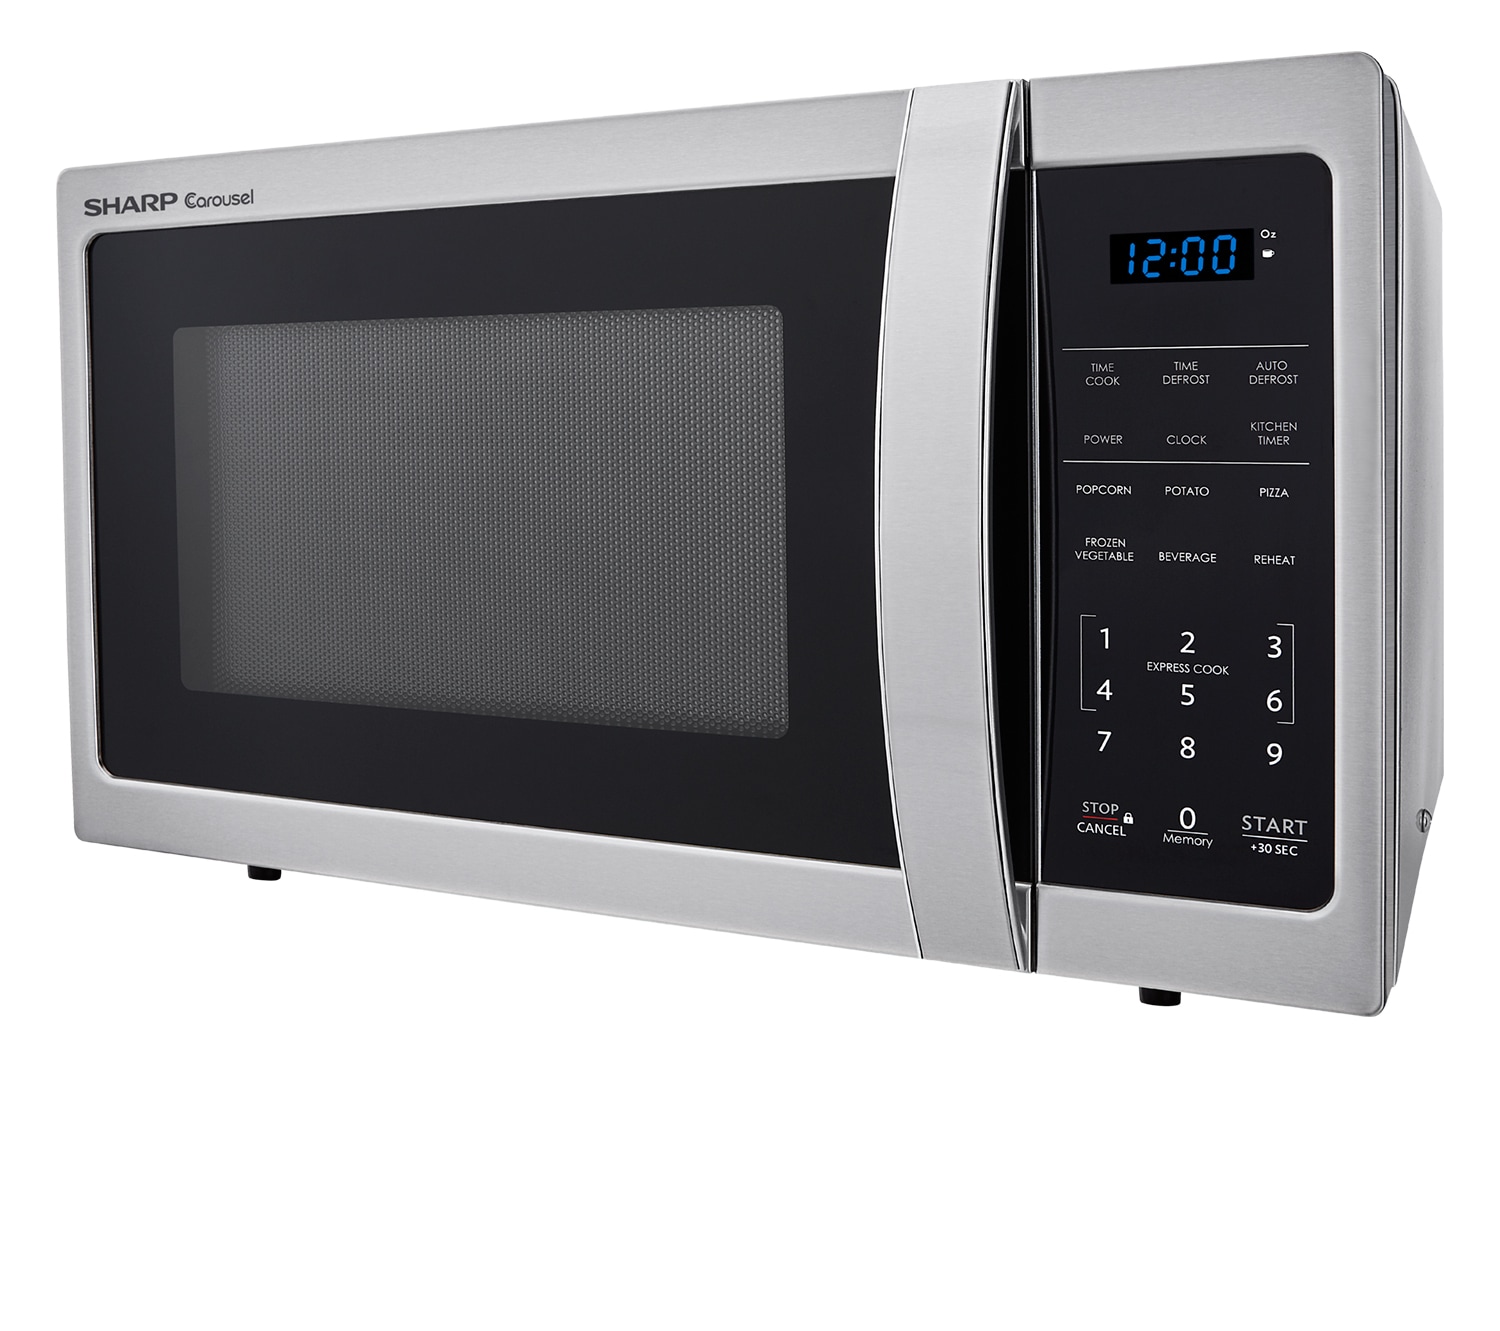 Capacity Portable Microwave Oven is Suitable for Cars Trucks Homes /  Offices US Plug Gray gray